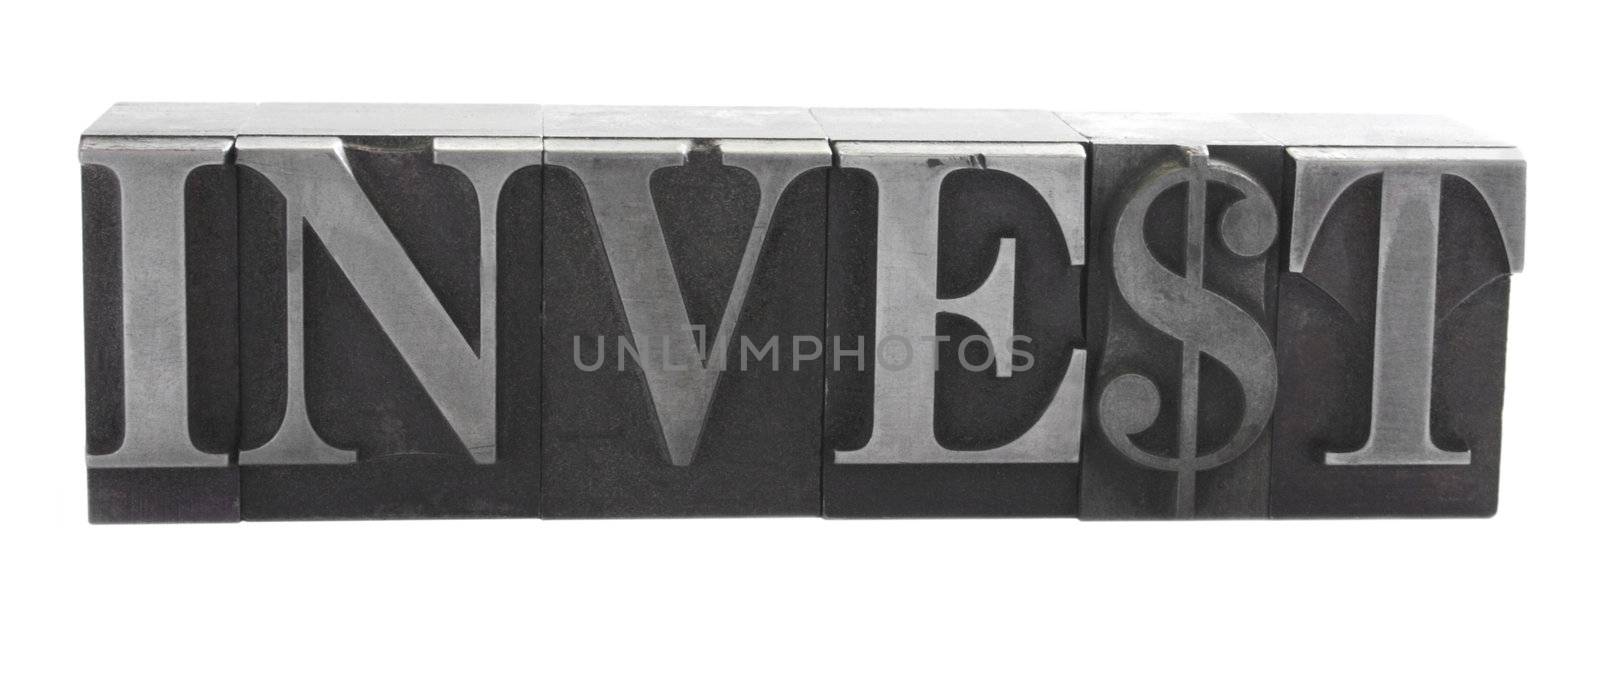 old metal letterpress letters form the word 'invest' isolated on white